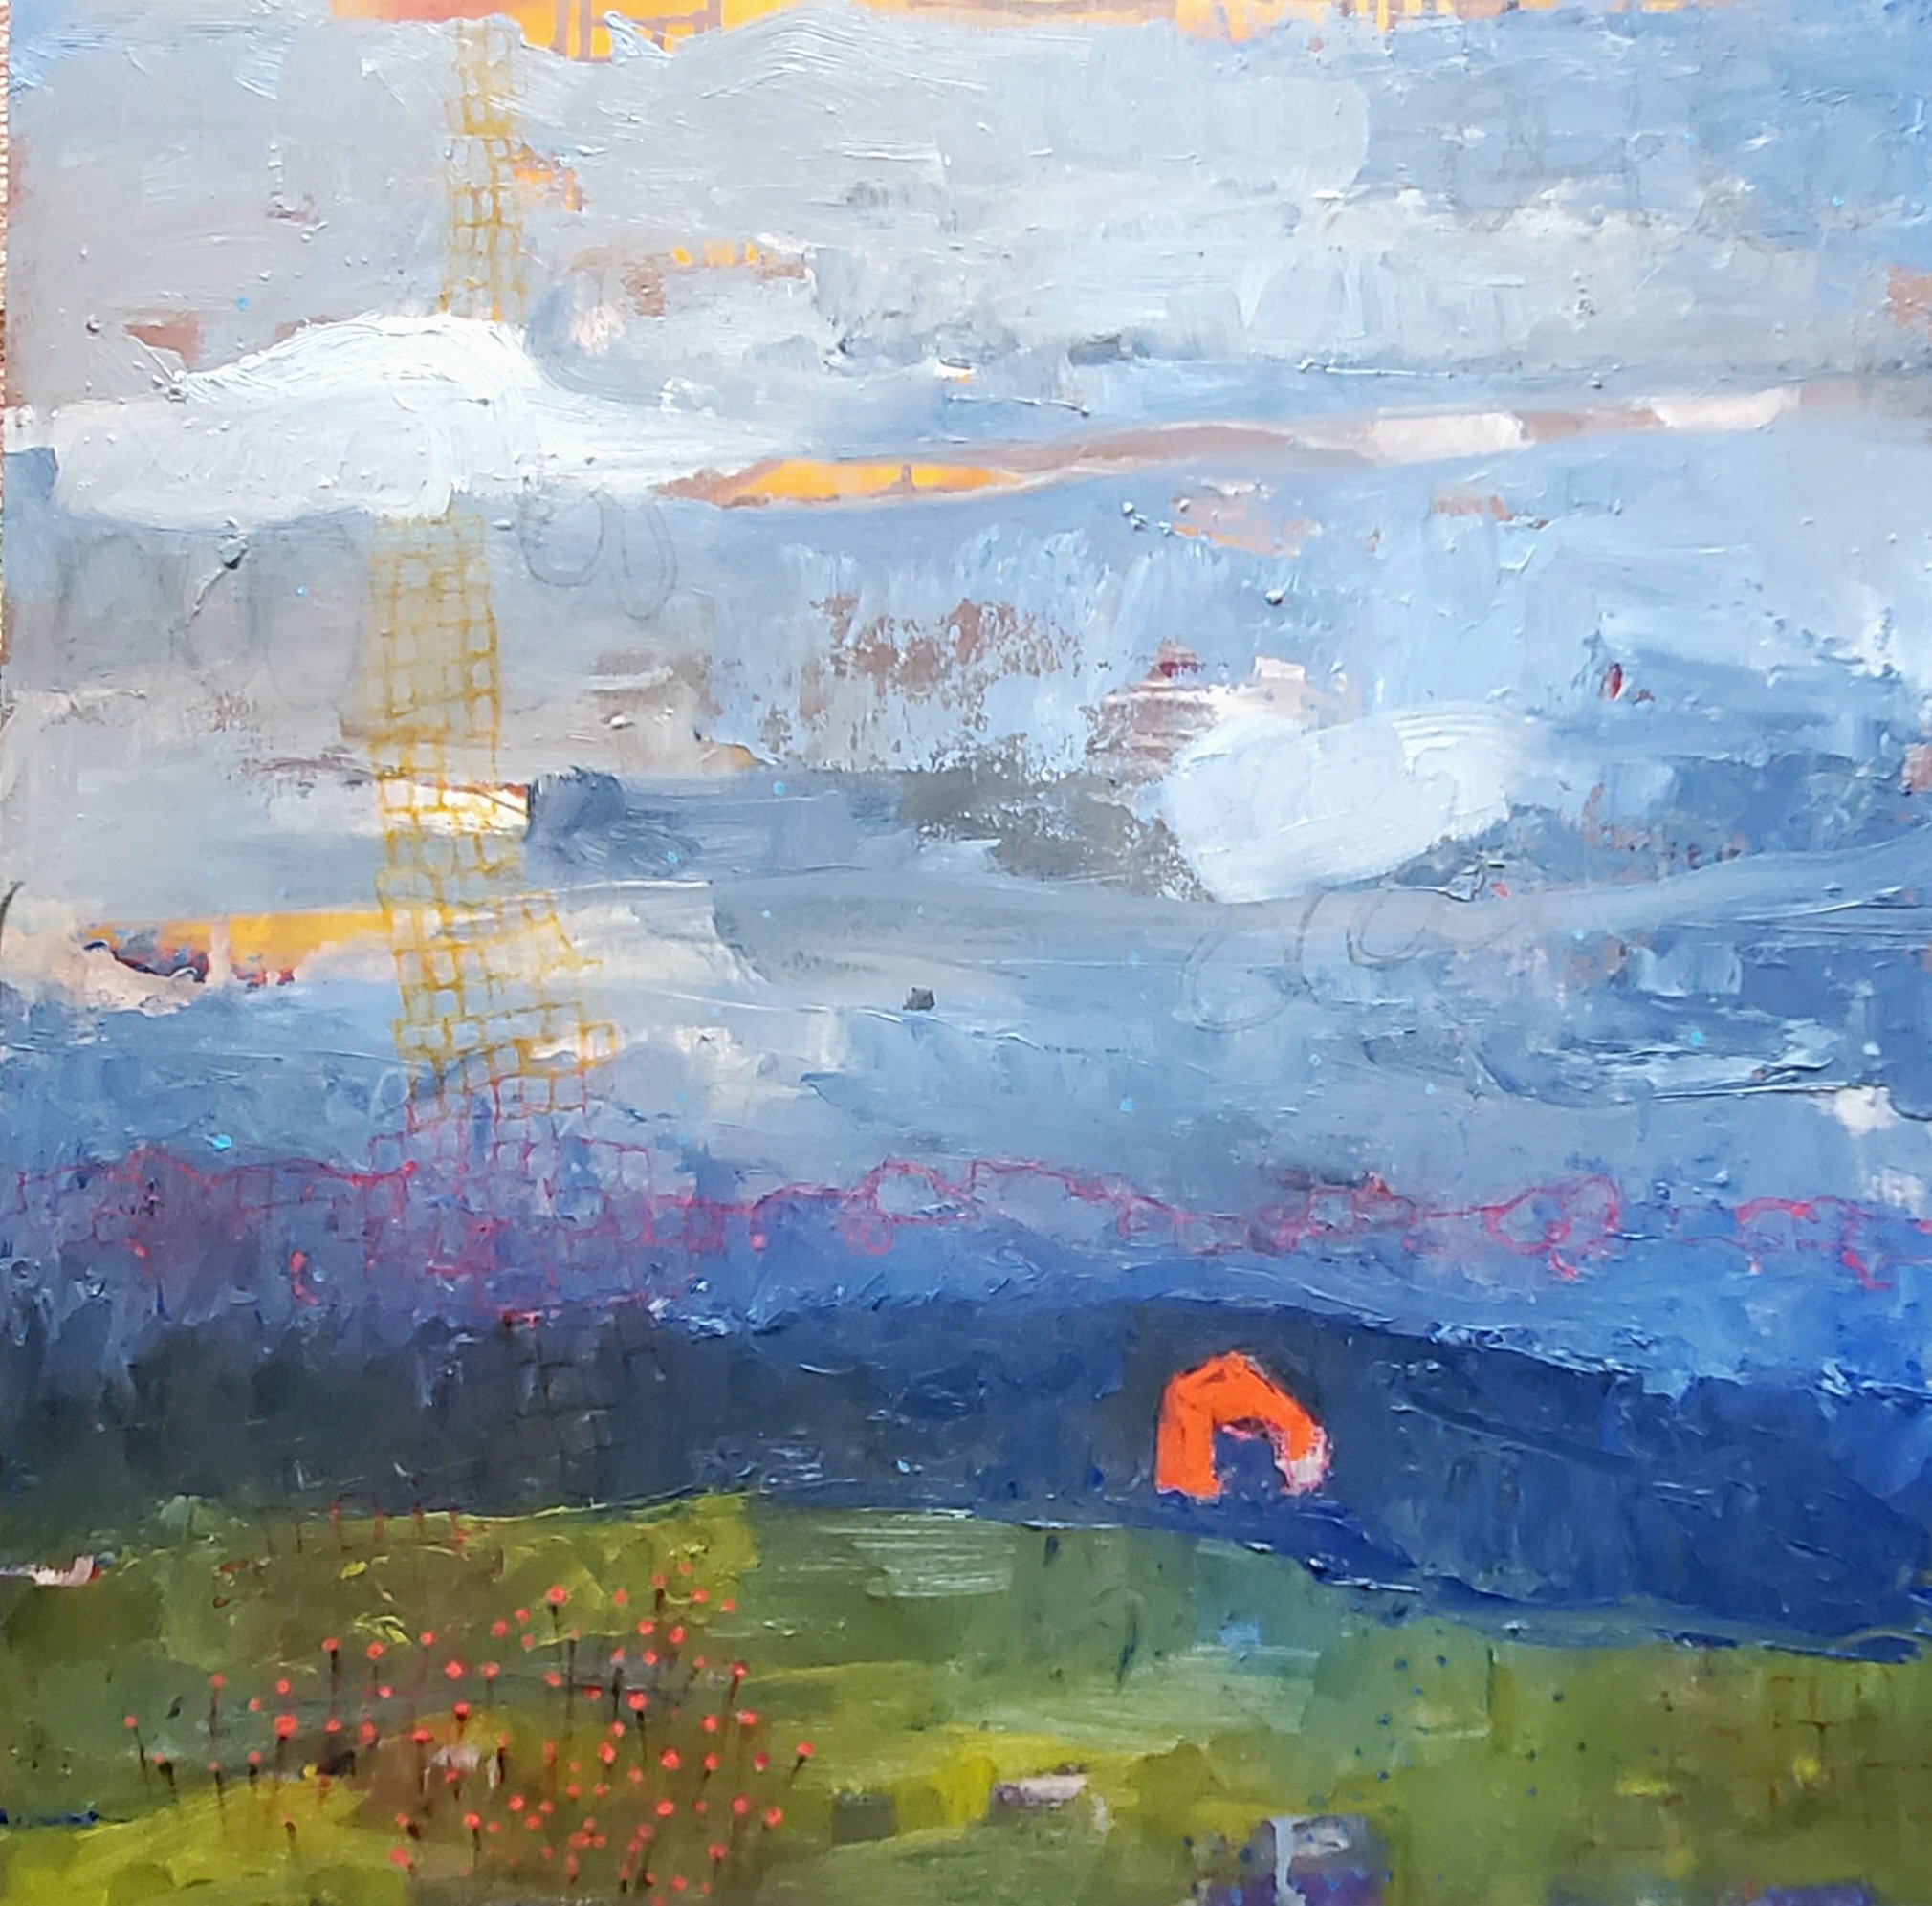 Red shed and sunset shower,  oil on panel, 20x20, 2022, $500